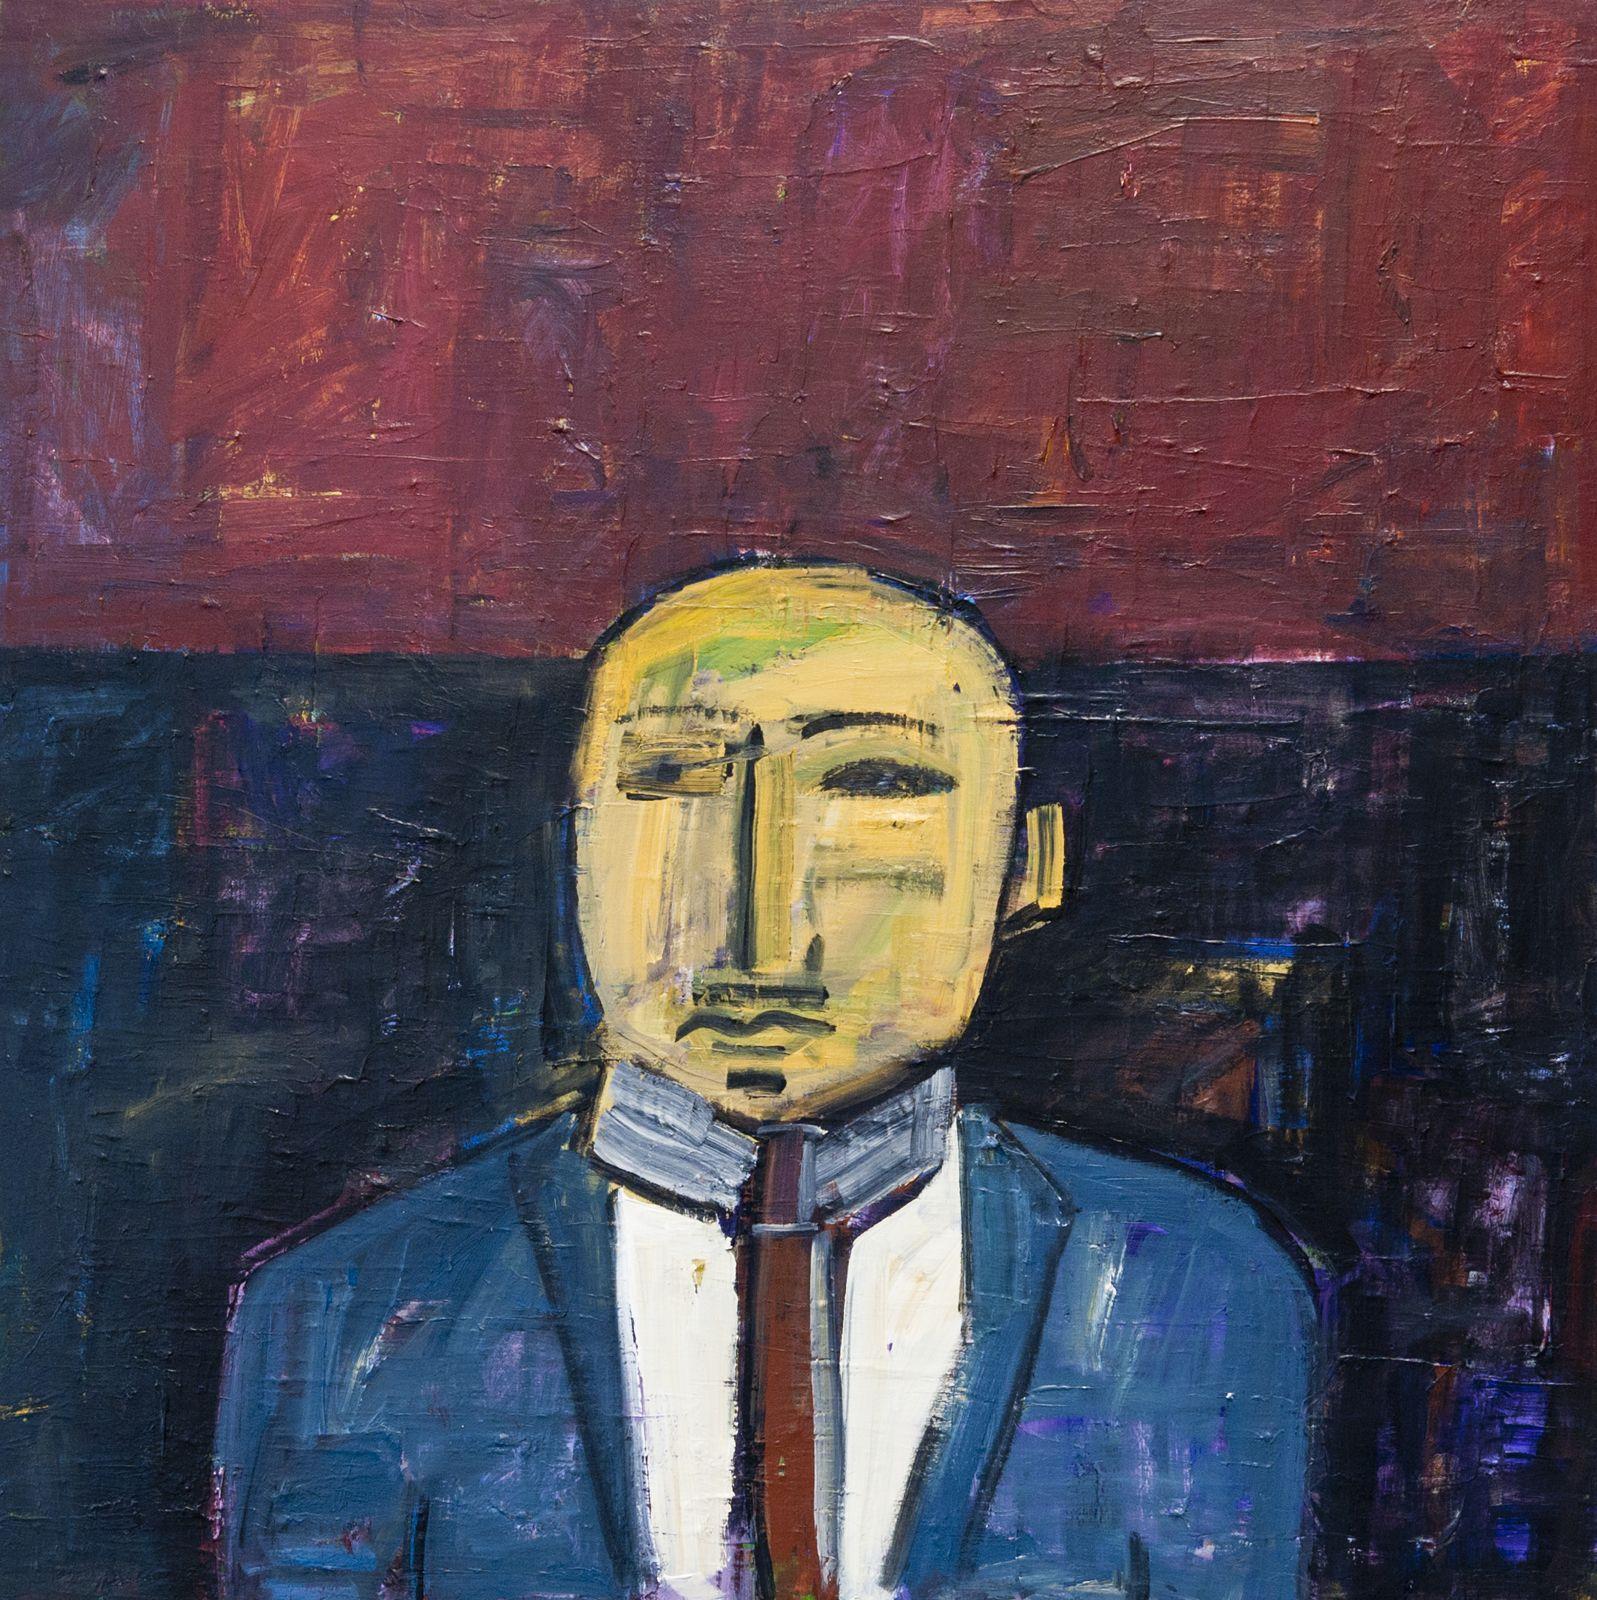 This work is part of a series of portraits of friends/strangers painted after one of many extended stay in Paris.  The work is typical of the artist's expressionist style. :: Painting :: Contemporary :: This piece comes with an official certificate